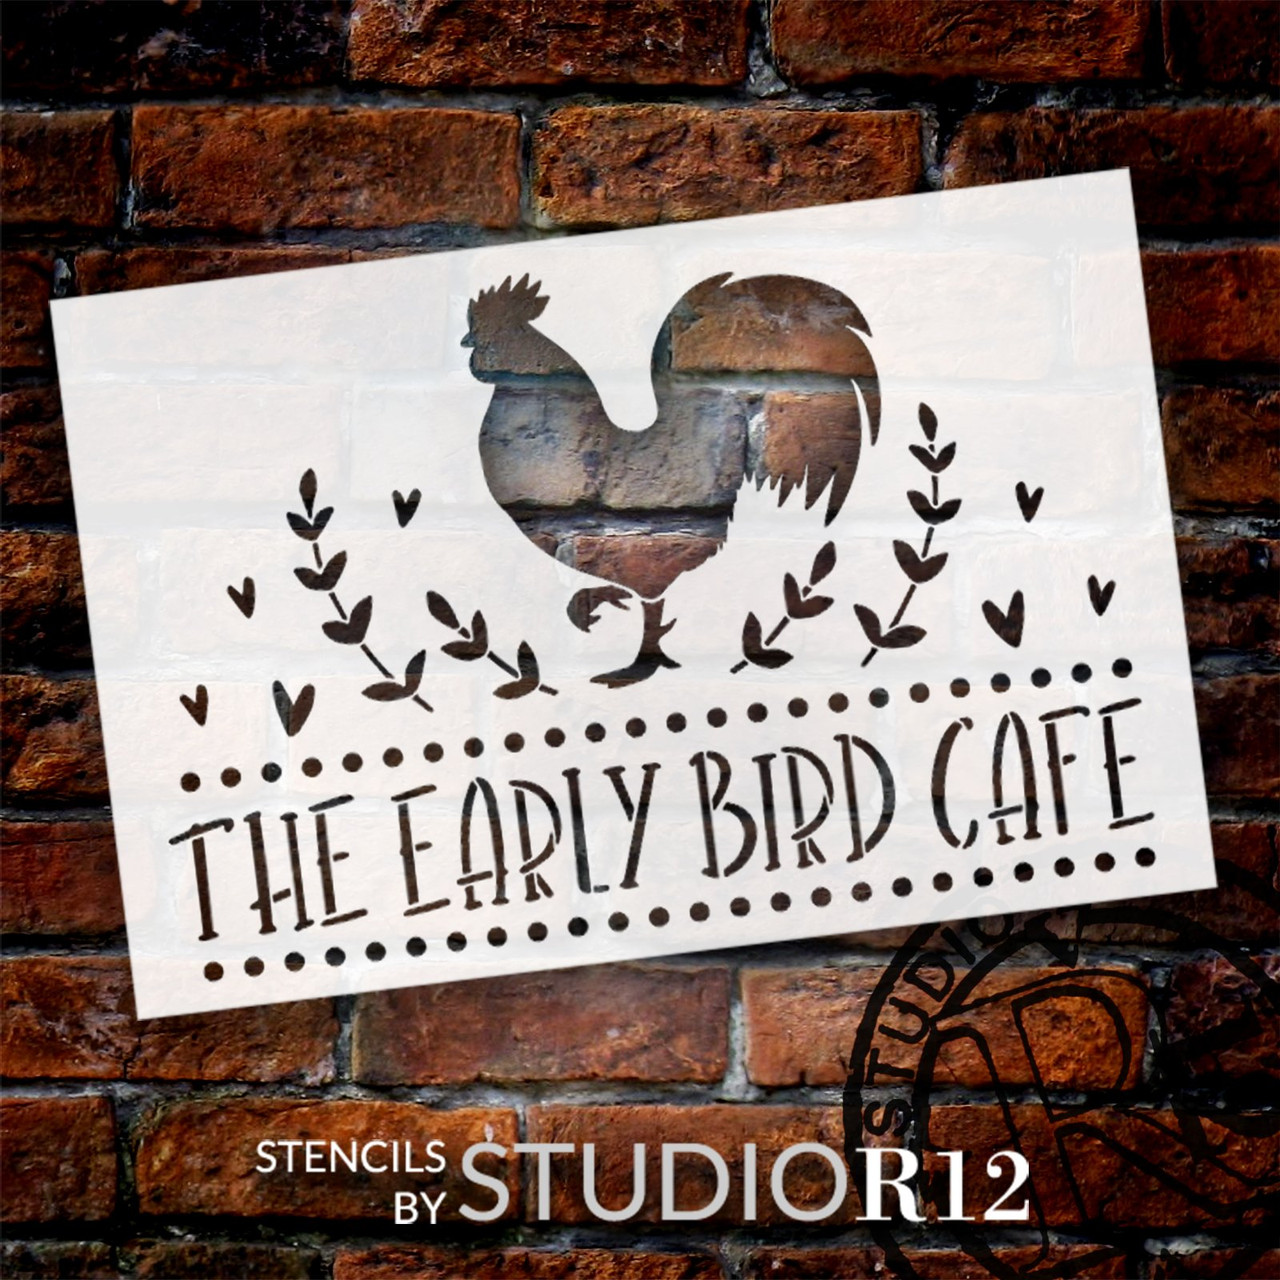 The Early Bird Cafe Rooster Stencil by StudioR12 | Craft DIY Rustic Home Decor | Paint Kitchen Sign | Select Size